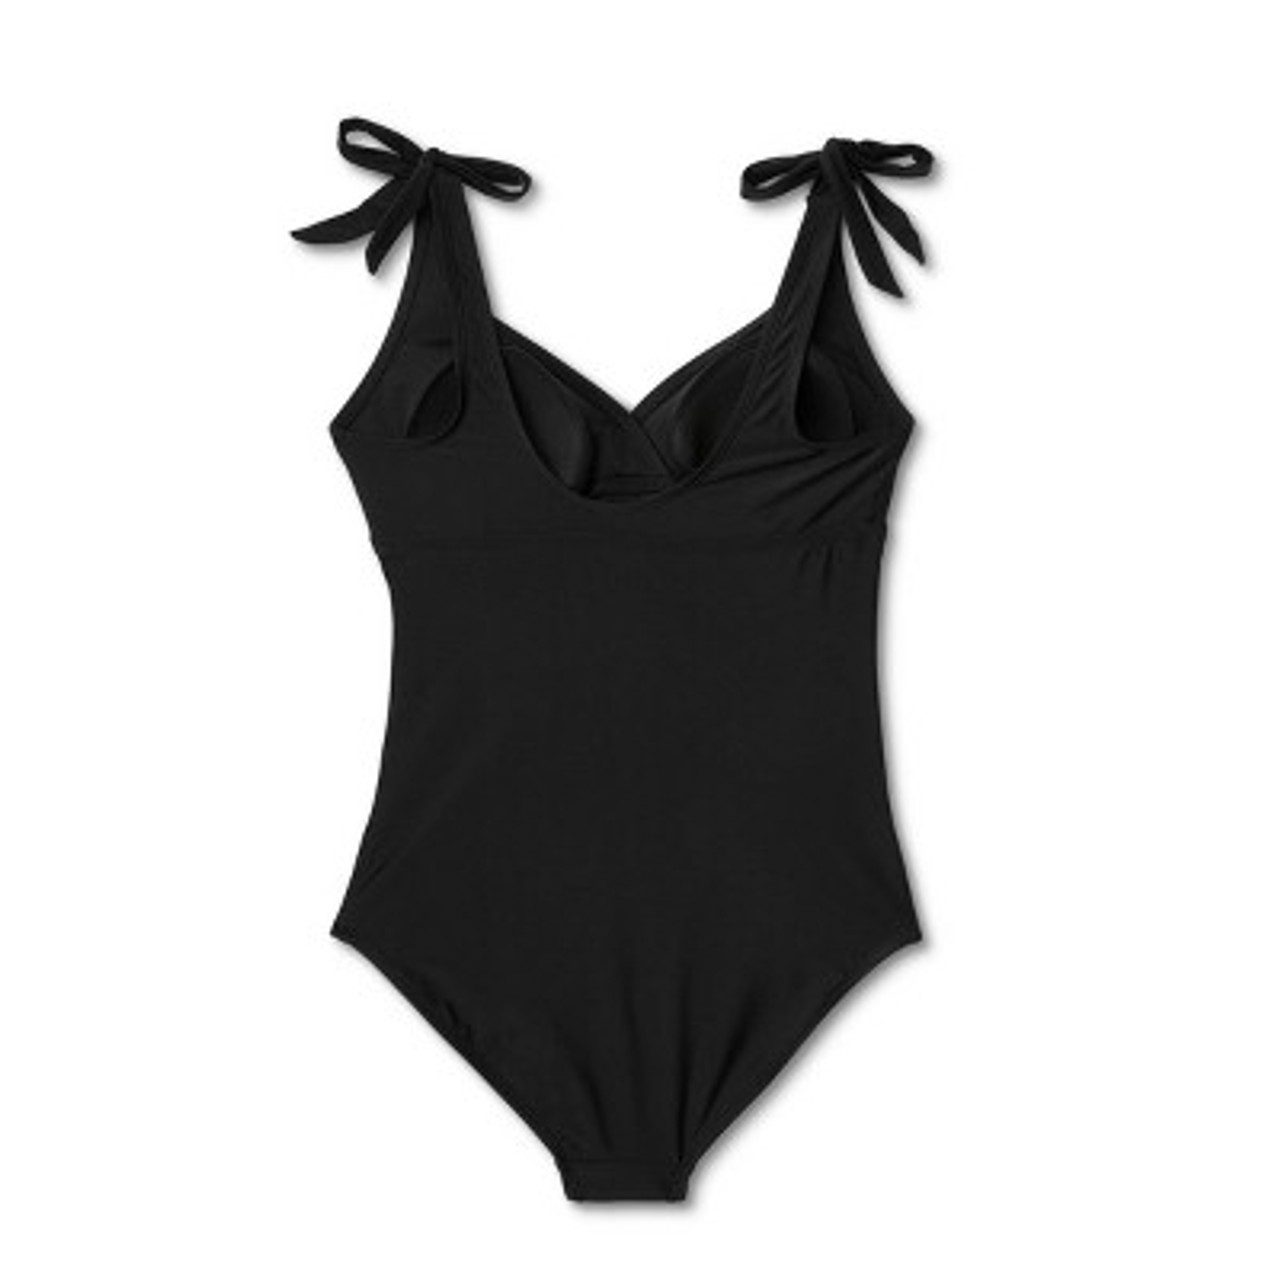 Tie Strap One Piece Maternity Swimsuit - Isabel Maternity by